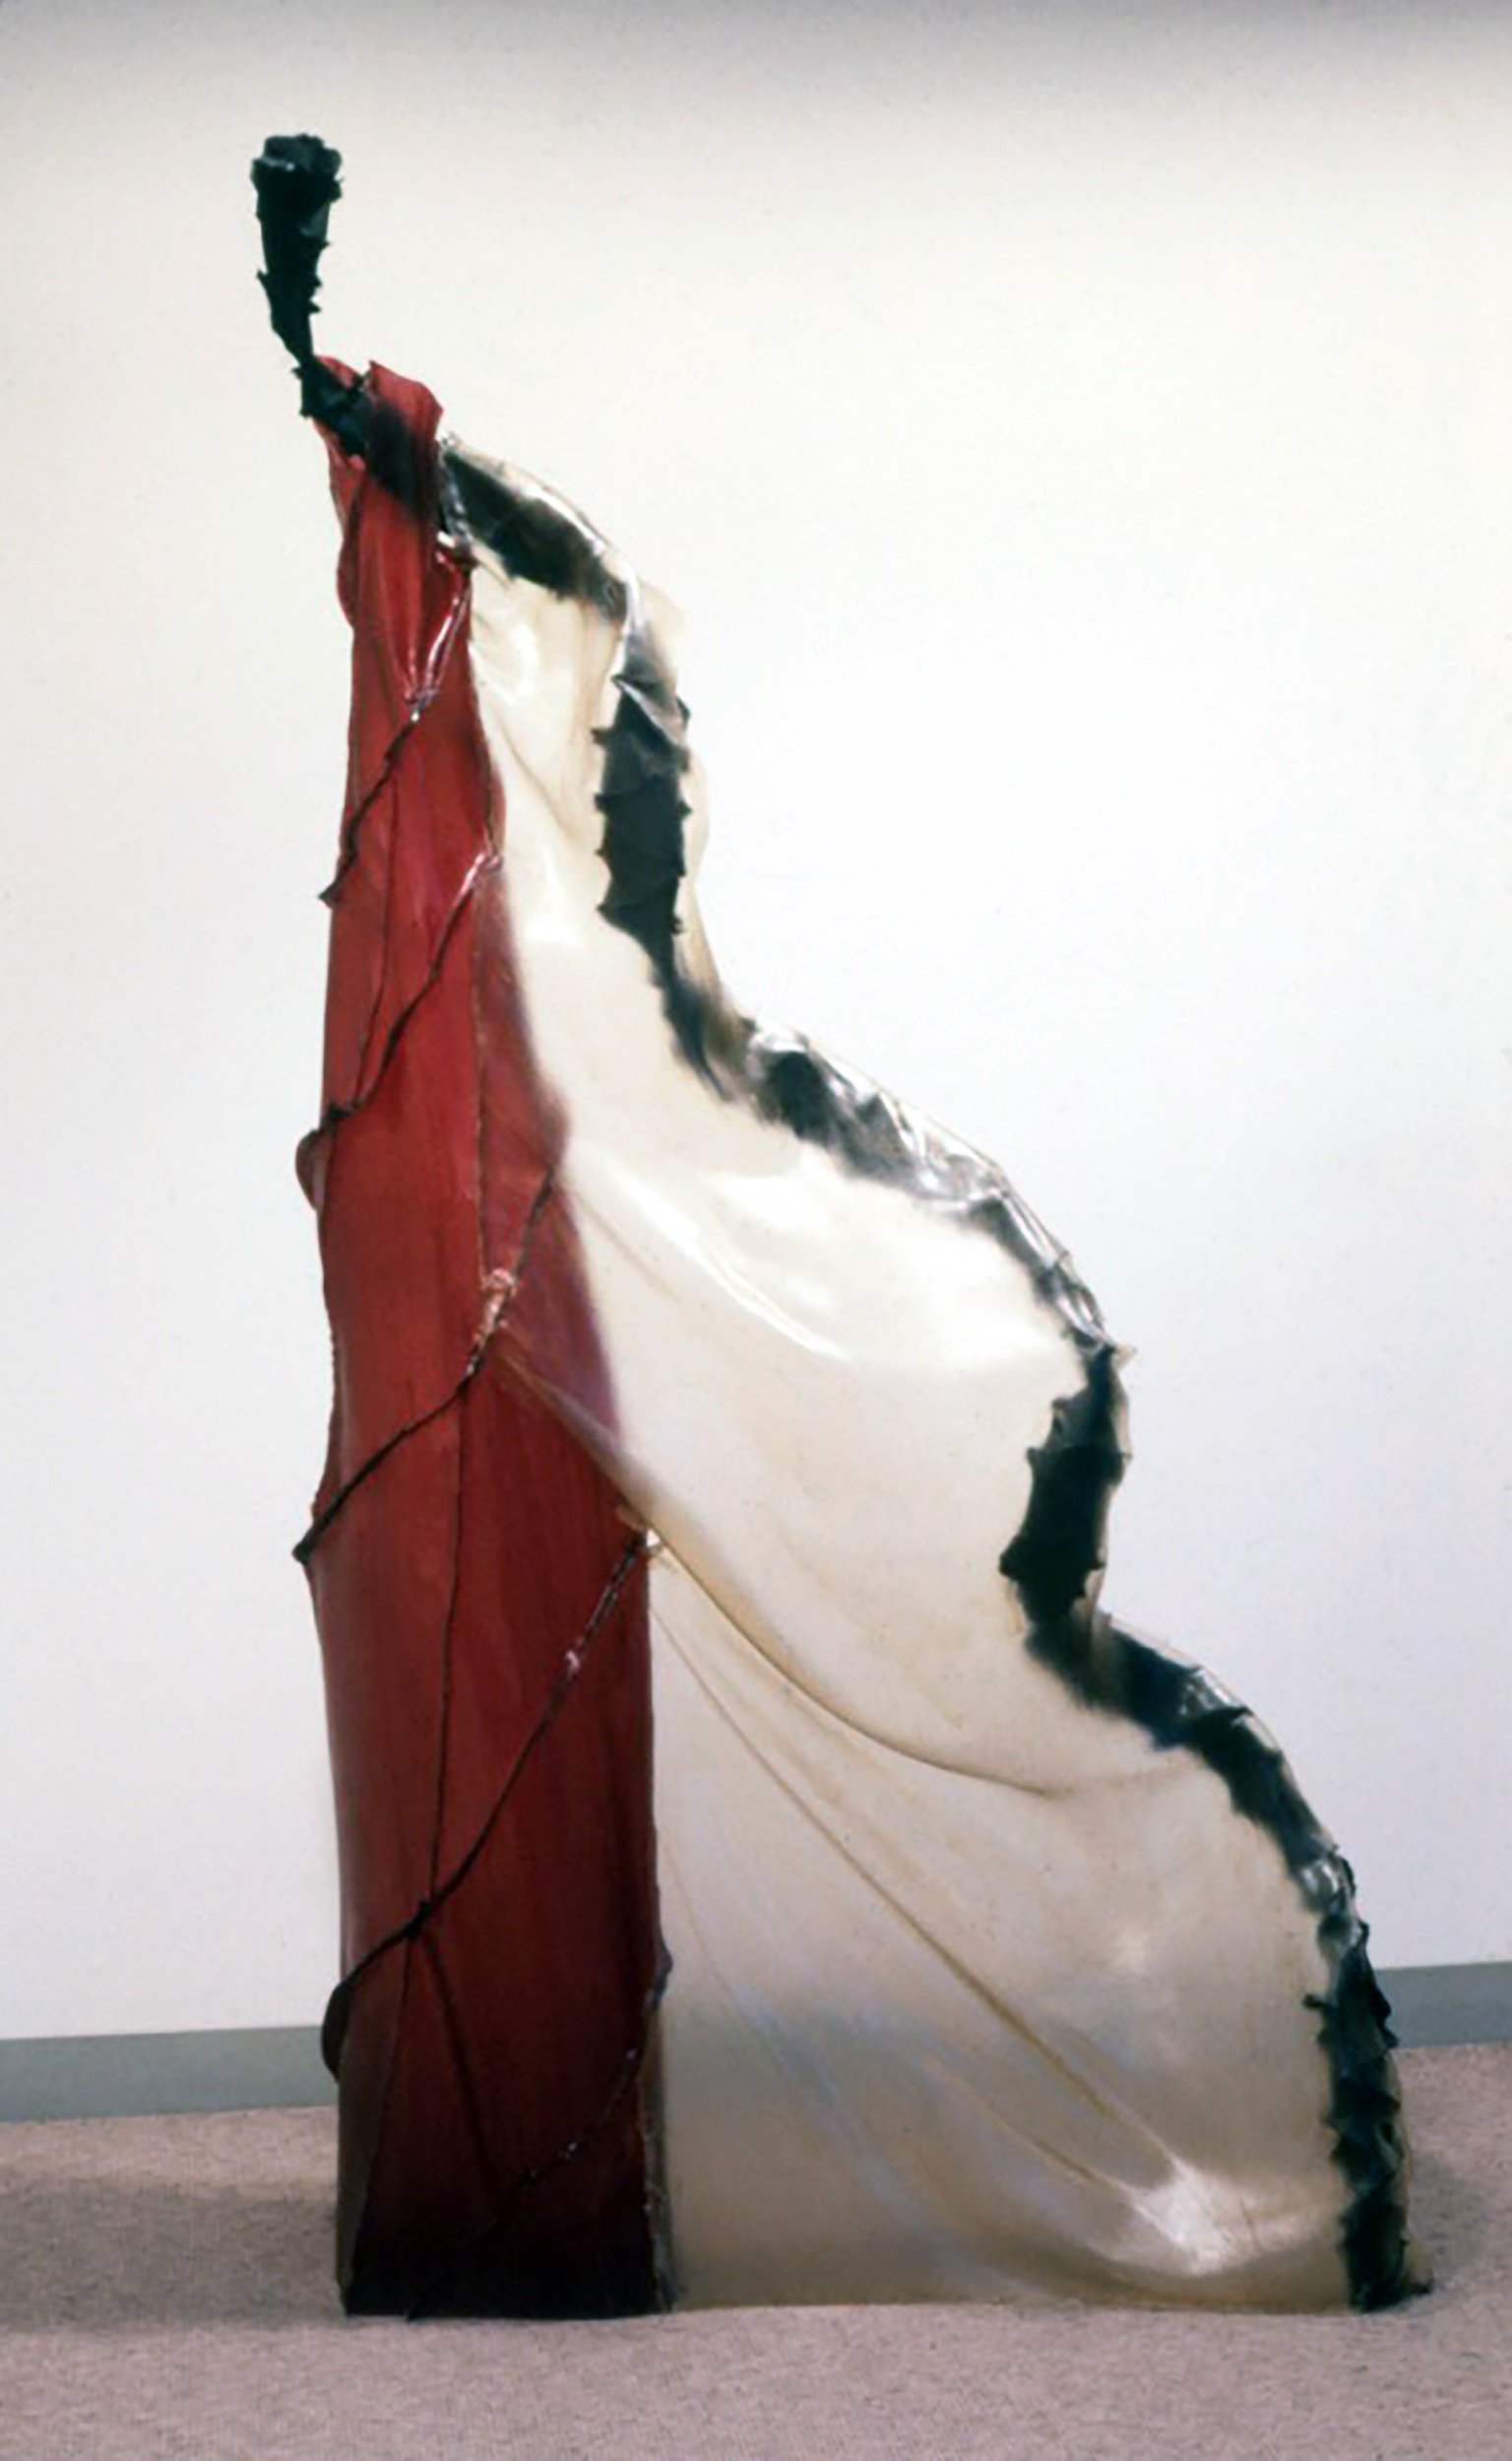  T.T., 1984, fiberglass cloth and polyester resin, 92 x 56 x 18 inches  With a couple of exceptions, the sculptures play a twisting, upward movement off a still, vertical core - actual or implied - like a vine twining around a tree, though in the scu